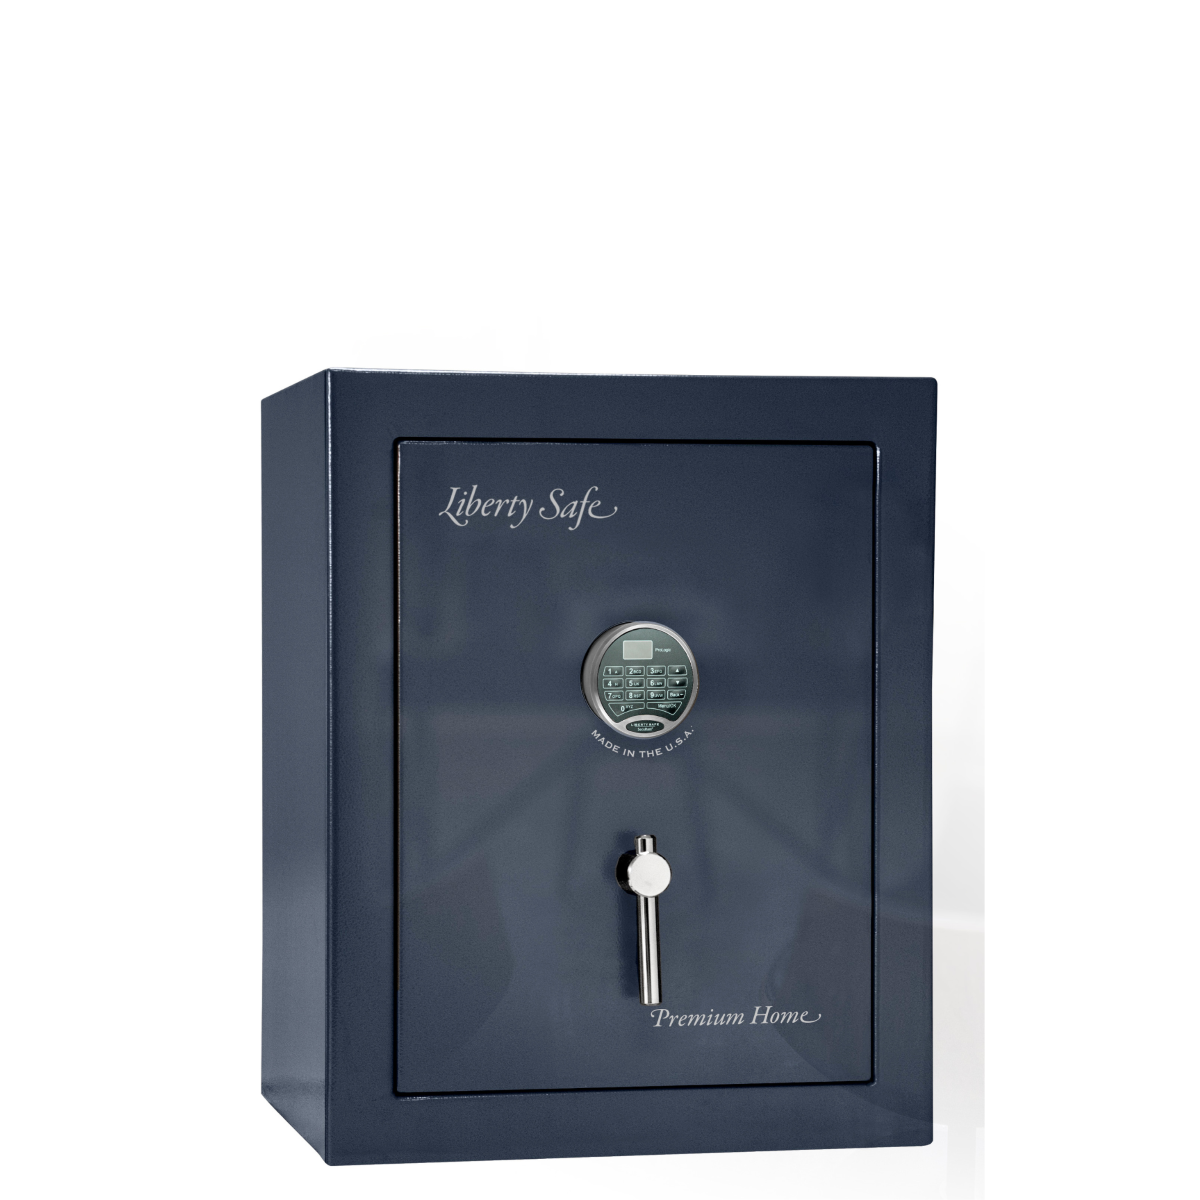 Premium Home Series | Level 7 Security | 2 Hour Fire Protection | 08 | Dimensions: 30"(H) x 24"(W) x 20.25"(D) | Blue Gloss - Closed Door